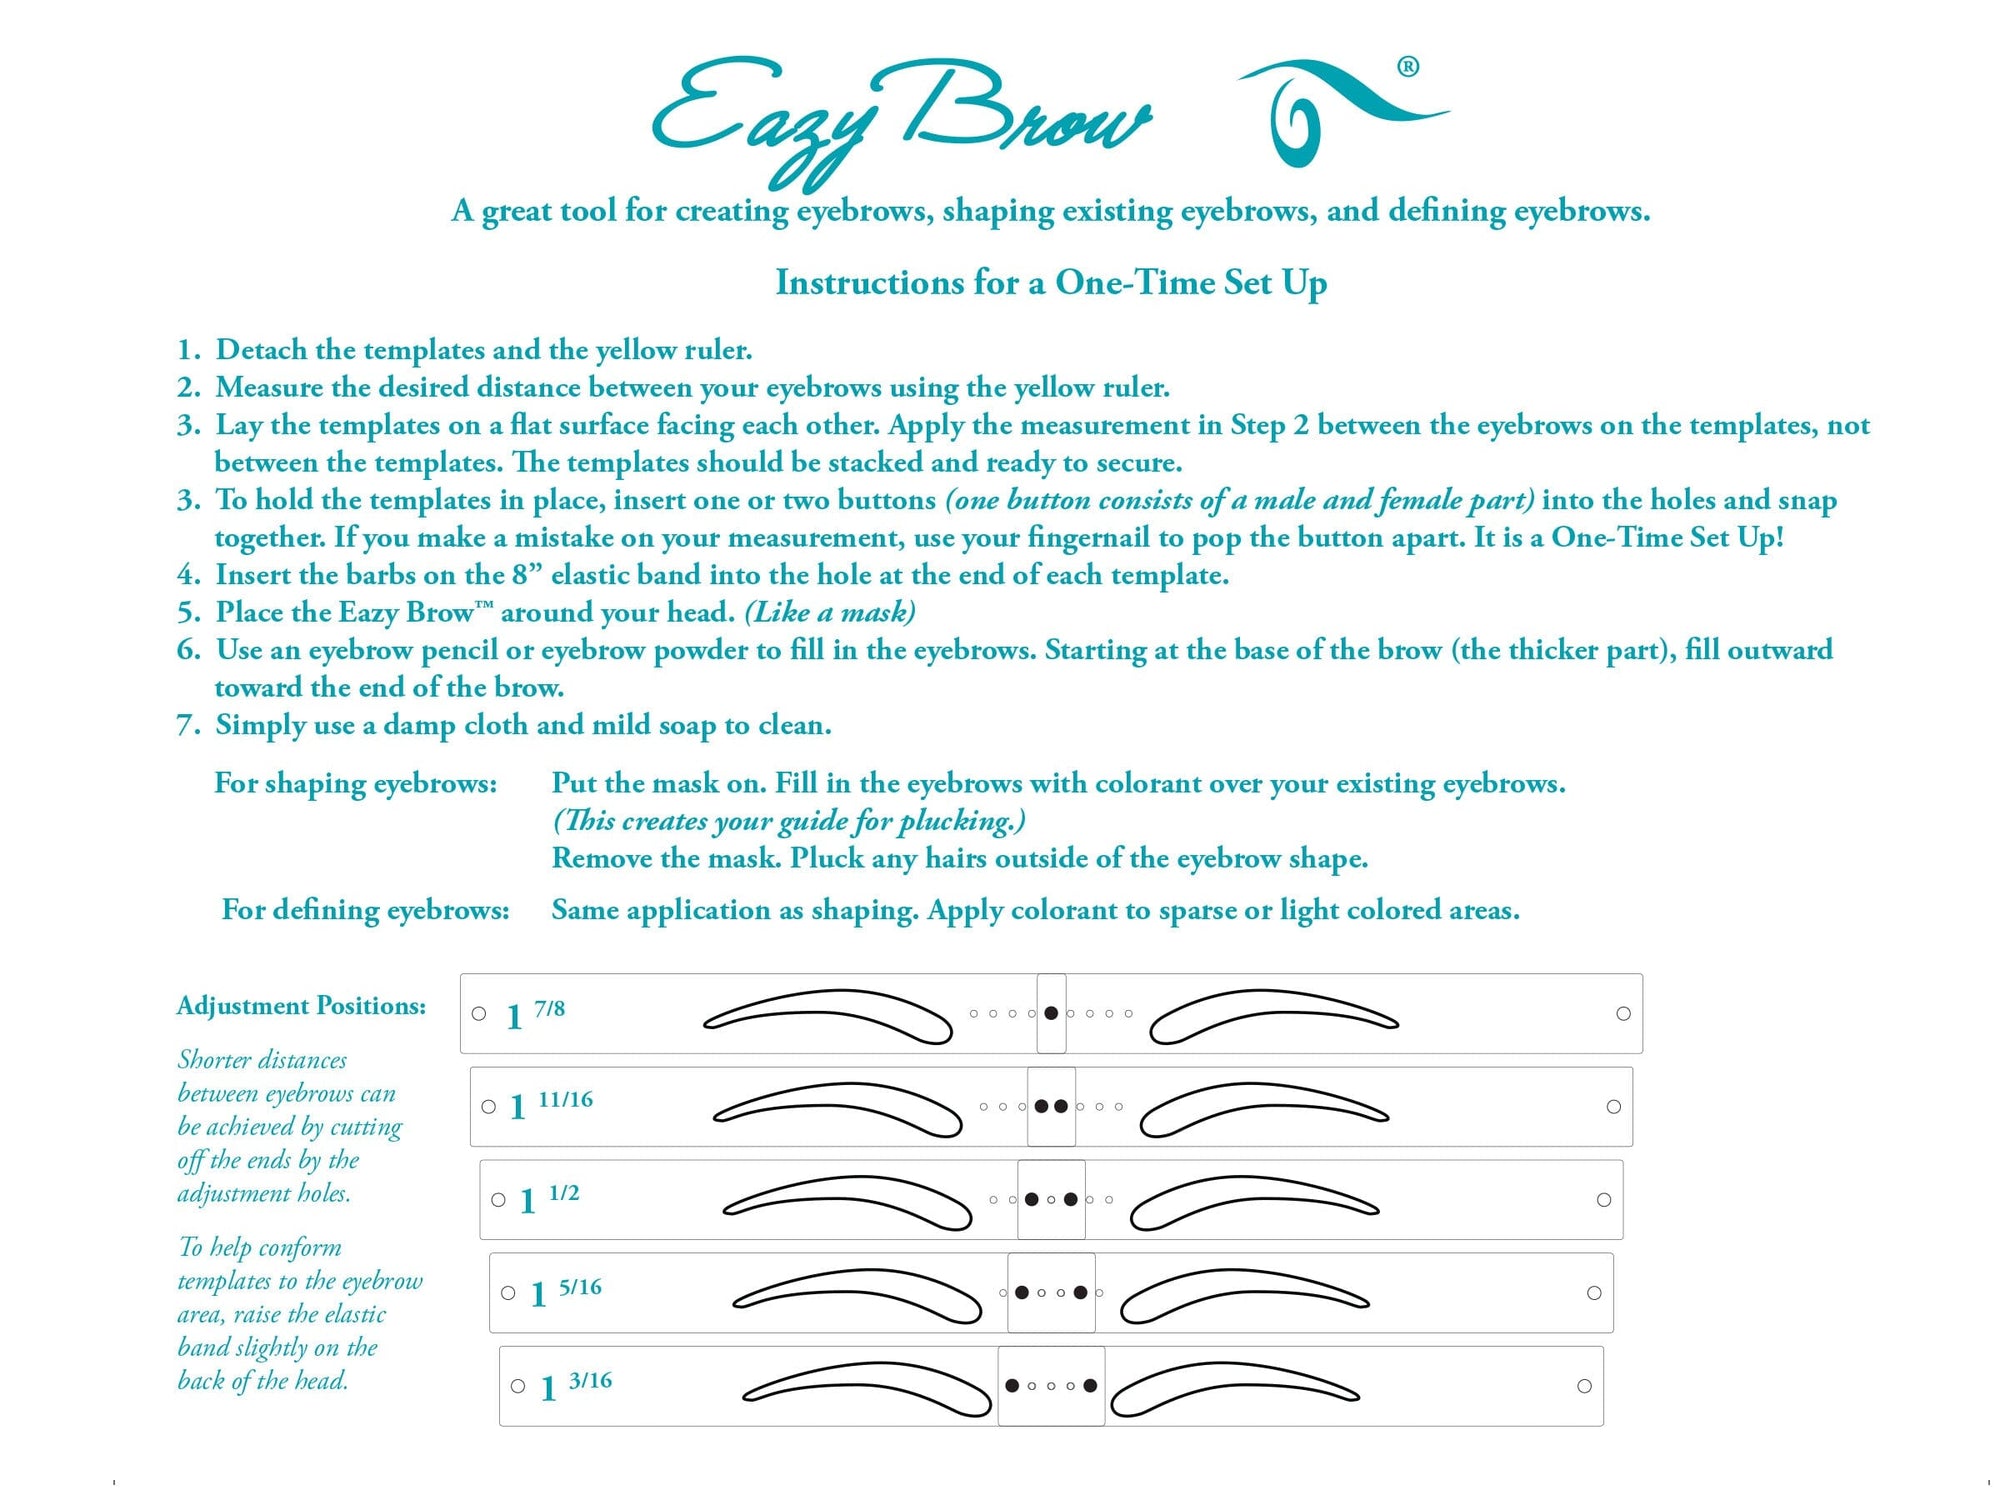 #8214 Eazy Brow Kit Instructions